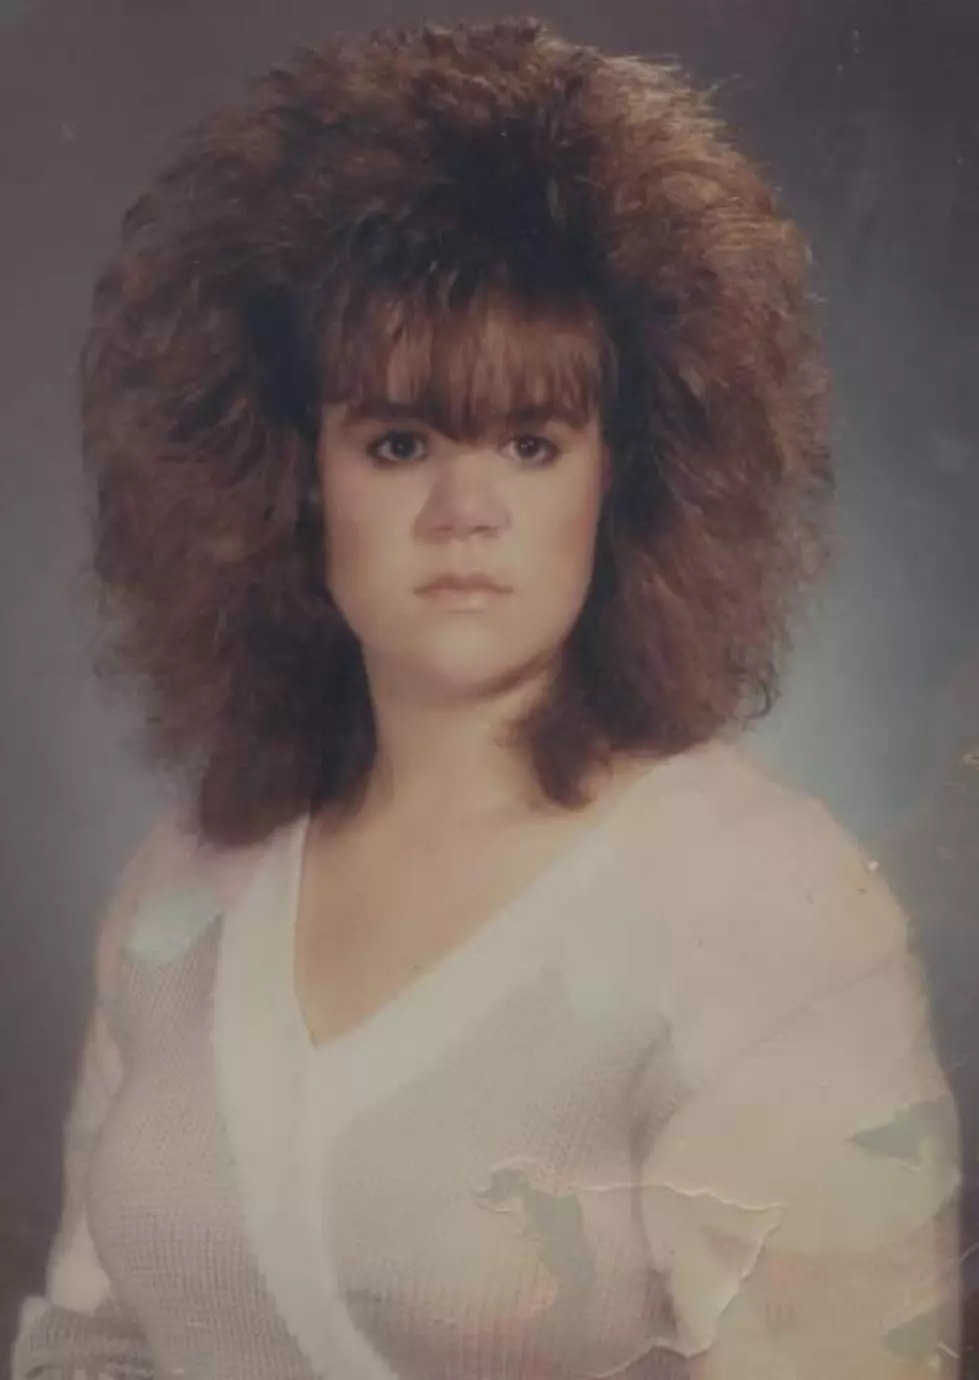 Check Out Some Of Our Big Hair For Bon Jovi Entries [Photos]